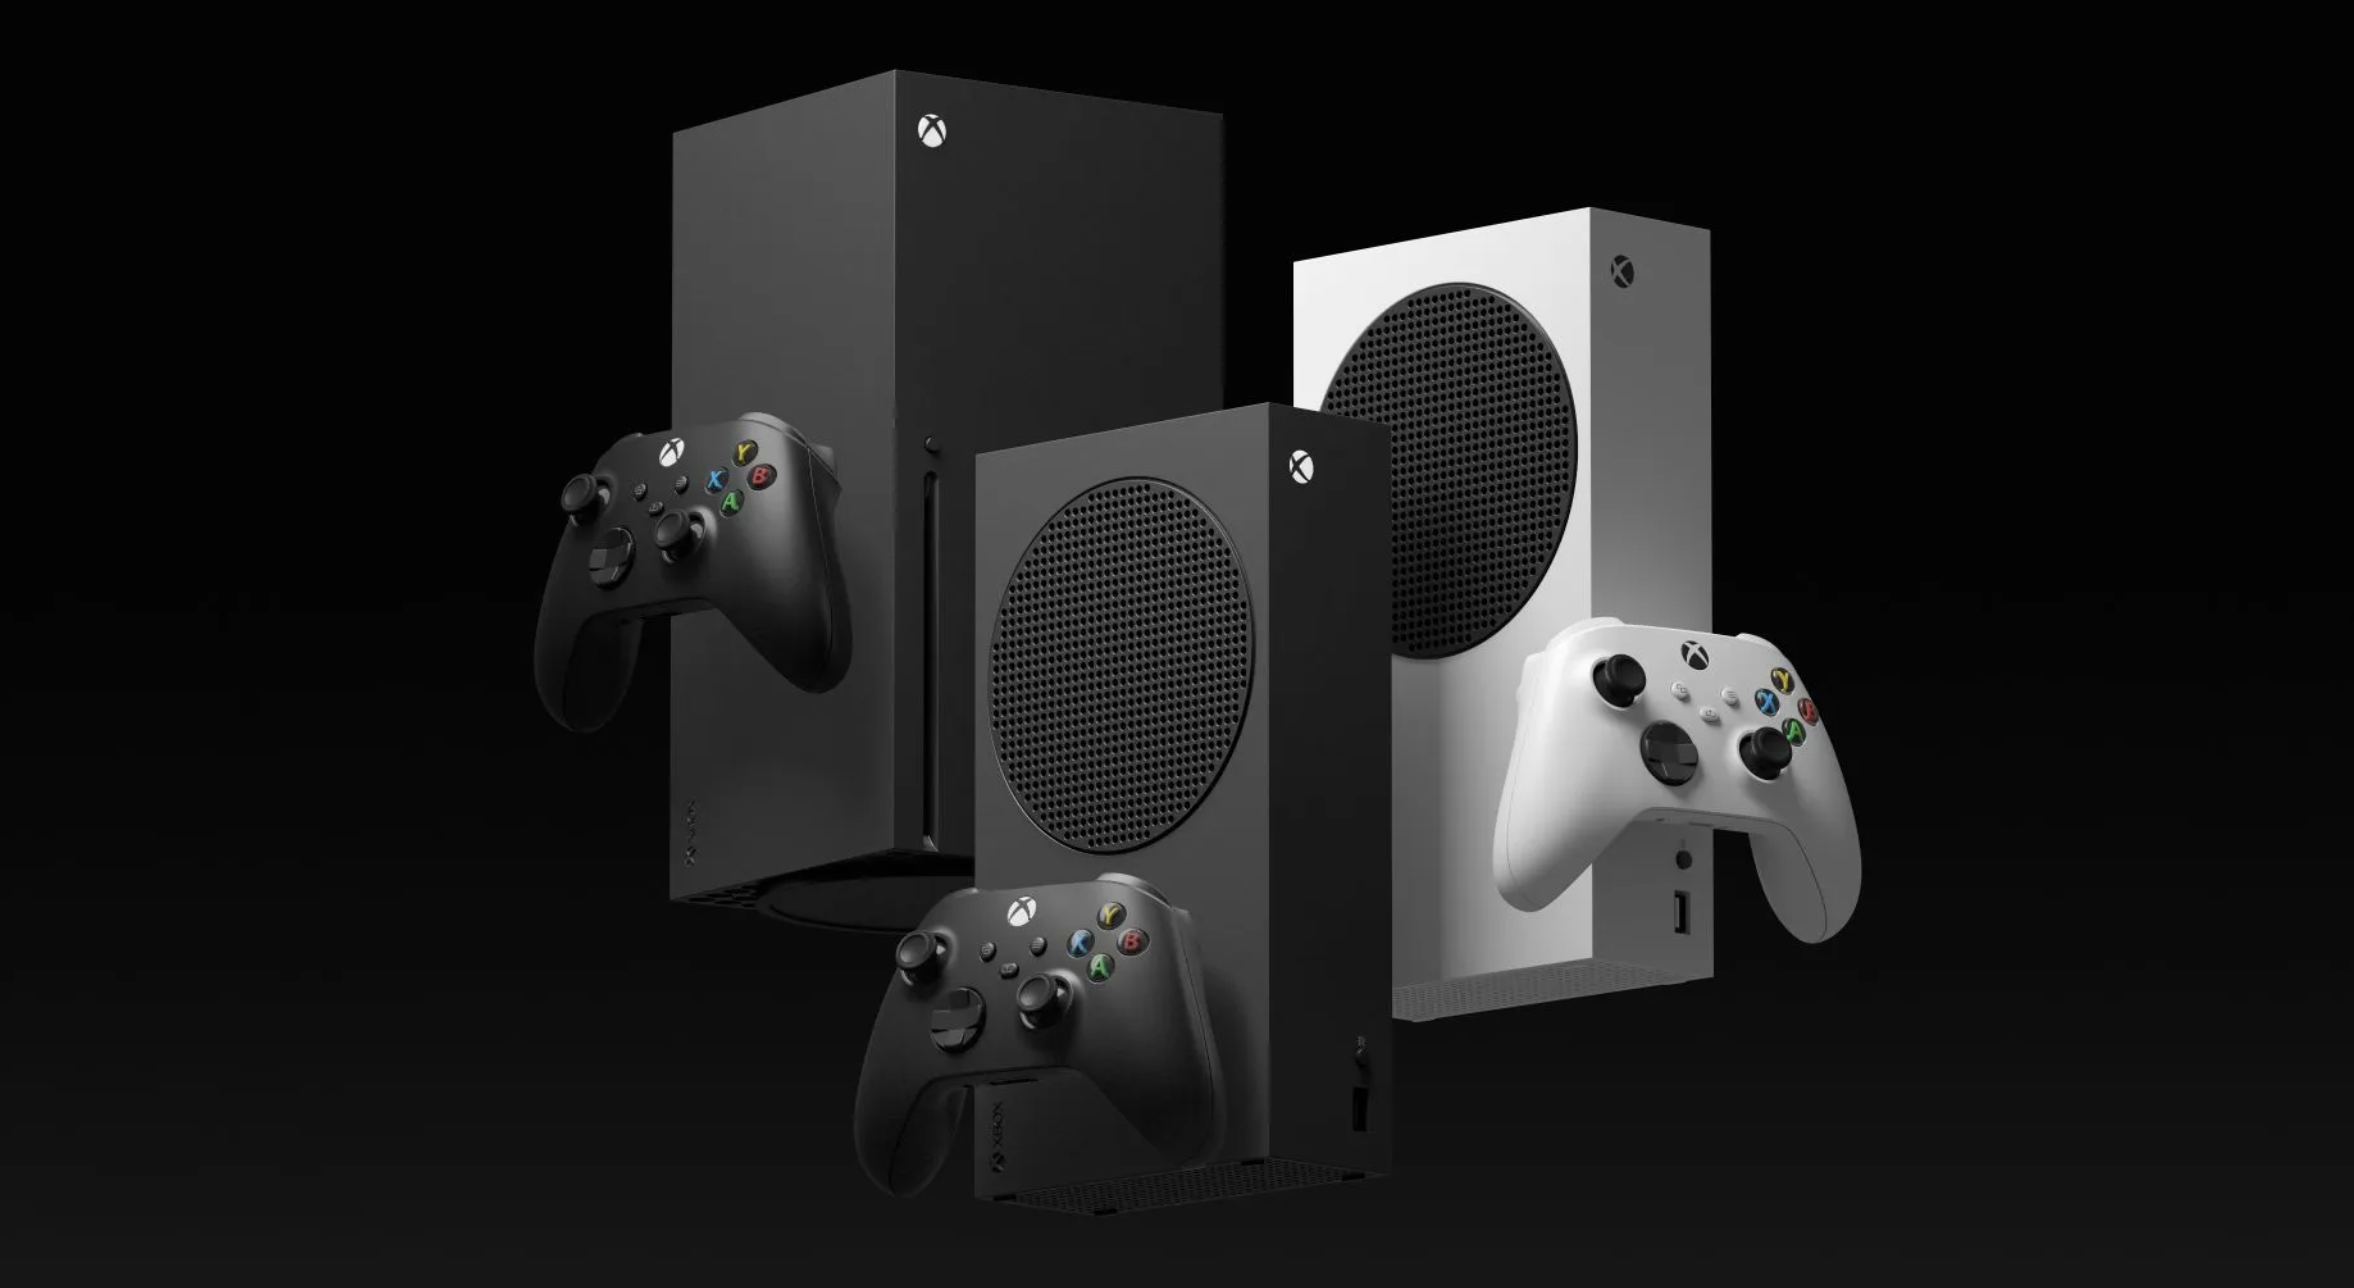 Microsoft Announces Upcoming Xbox Partner Preview